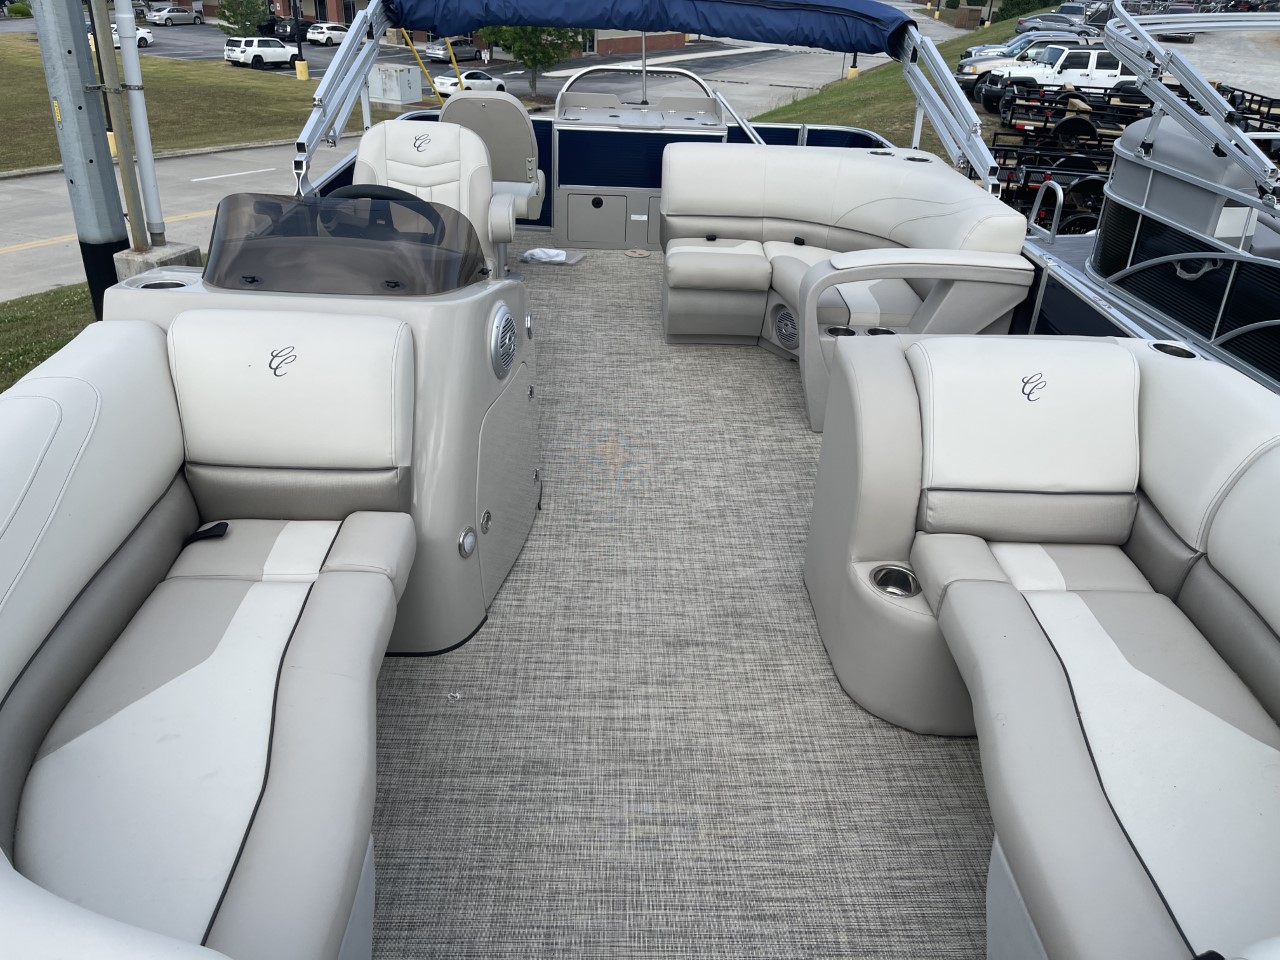 2022 CYPRESS CAY SEABREEZE 212 Pontoon Boat for sale in College Dale, TN - image 1 